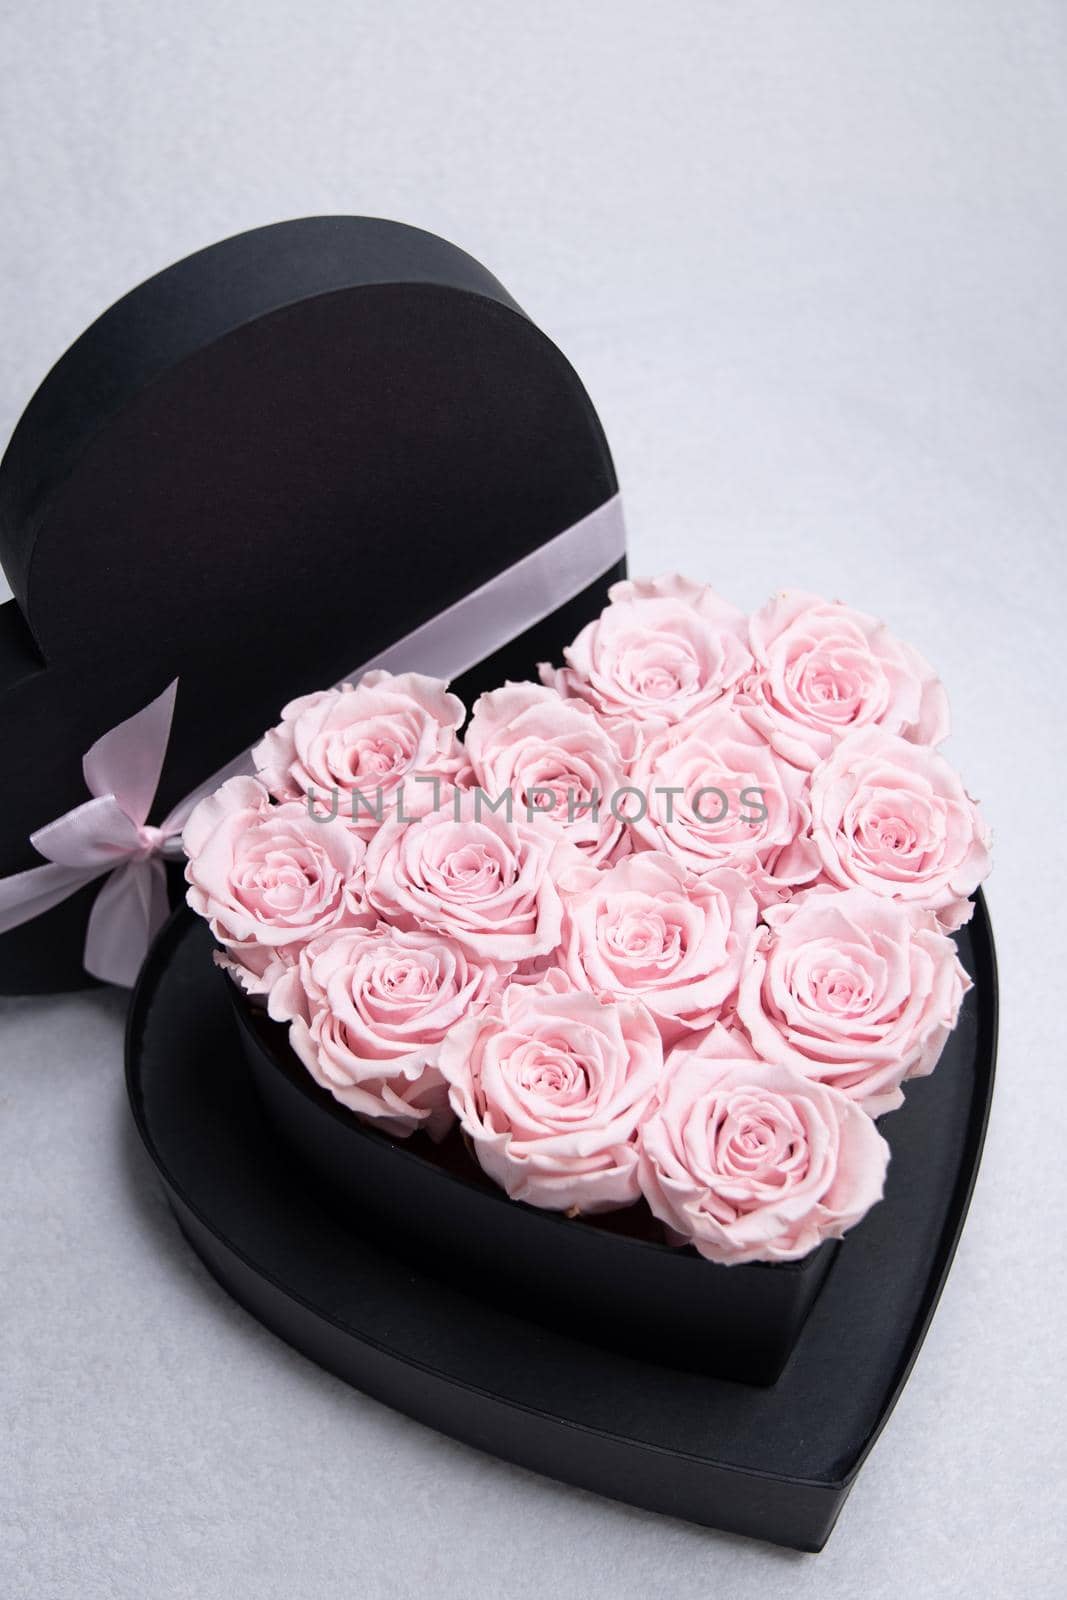 heart-shaped cardboard box with pink roses on the table, a gift for valentine's by KaterinaDalemans